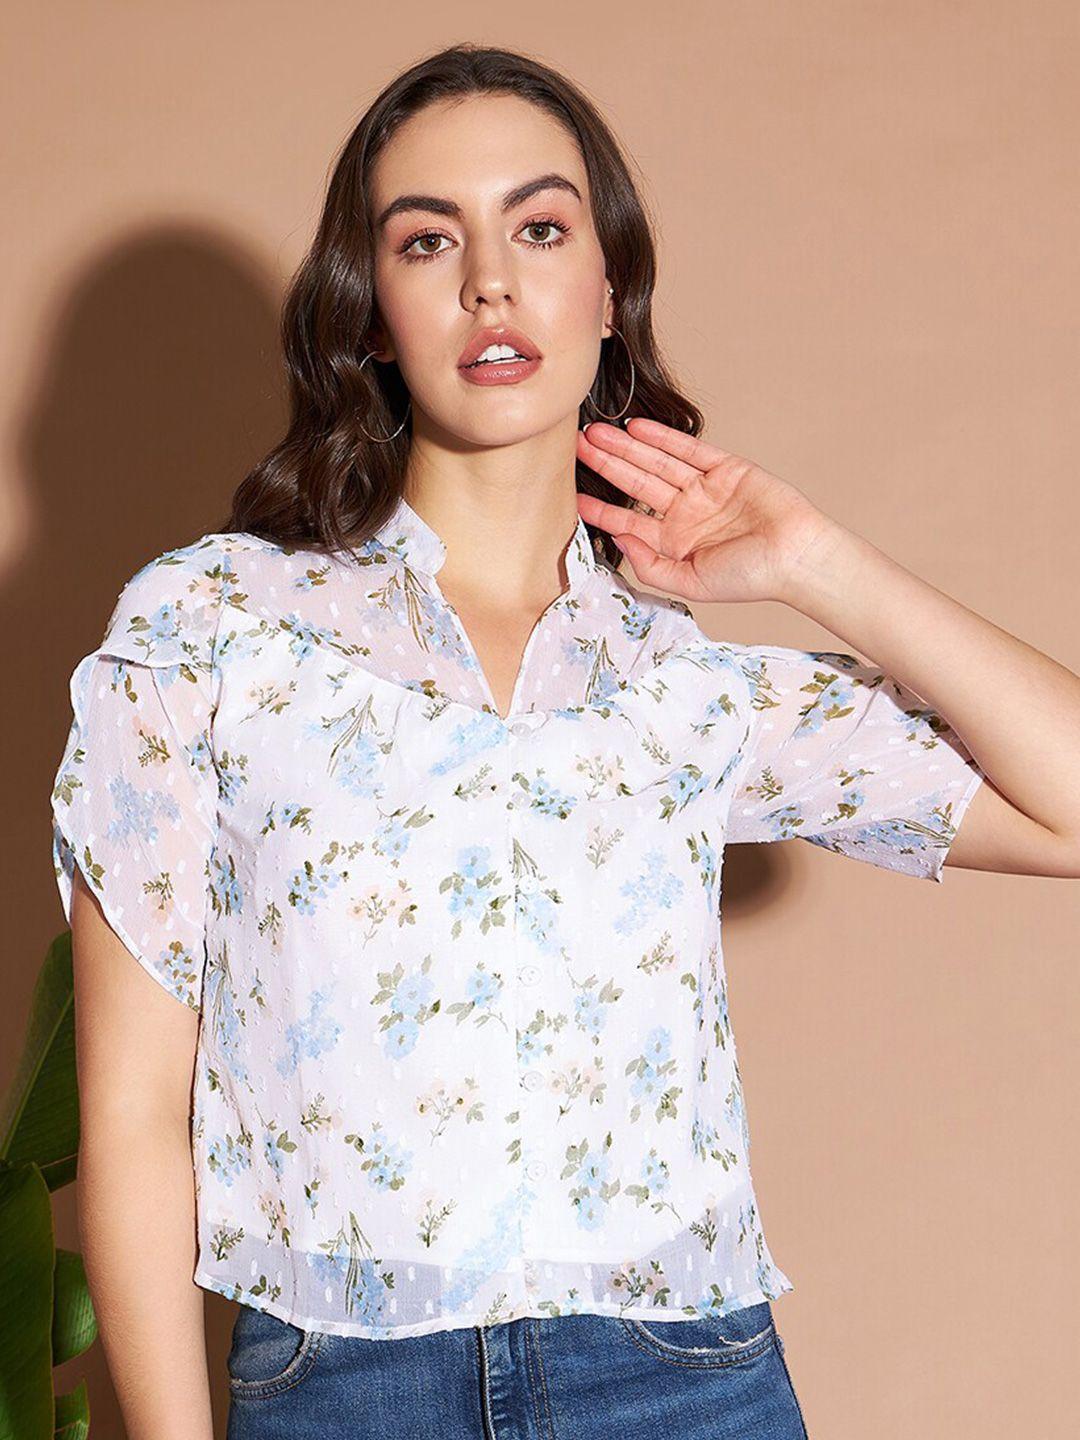 marie claire white & blue floral printed v-neck top